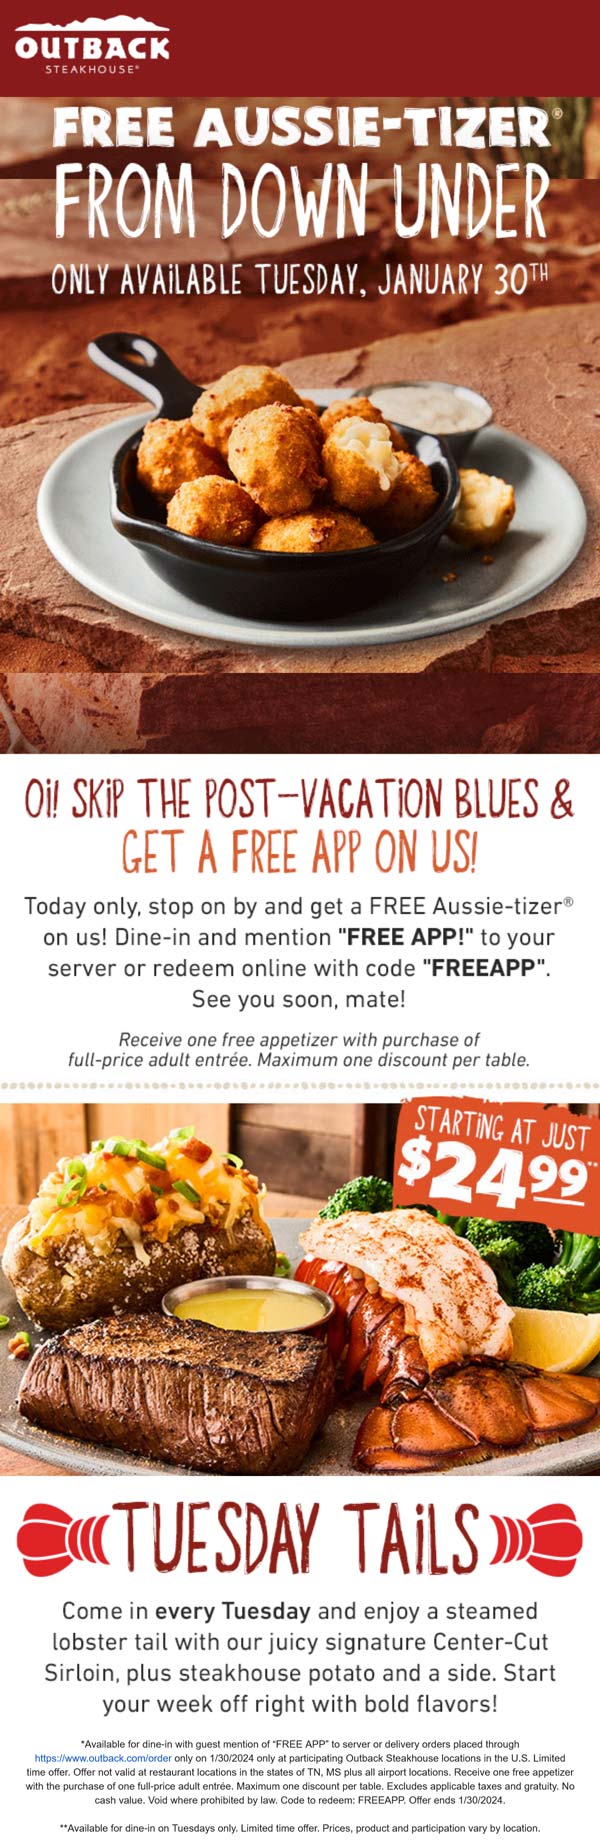 Outback Steakhouse restaurants Coupon  Free appetizer with your entree today at Outback Steakhouse, or online via promo code FREEAPP #outbacksteakhouse 